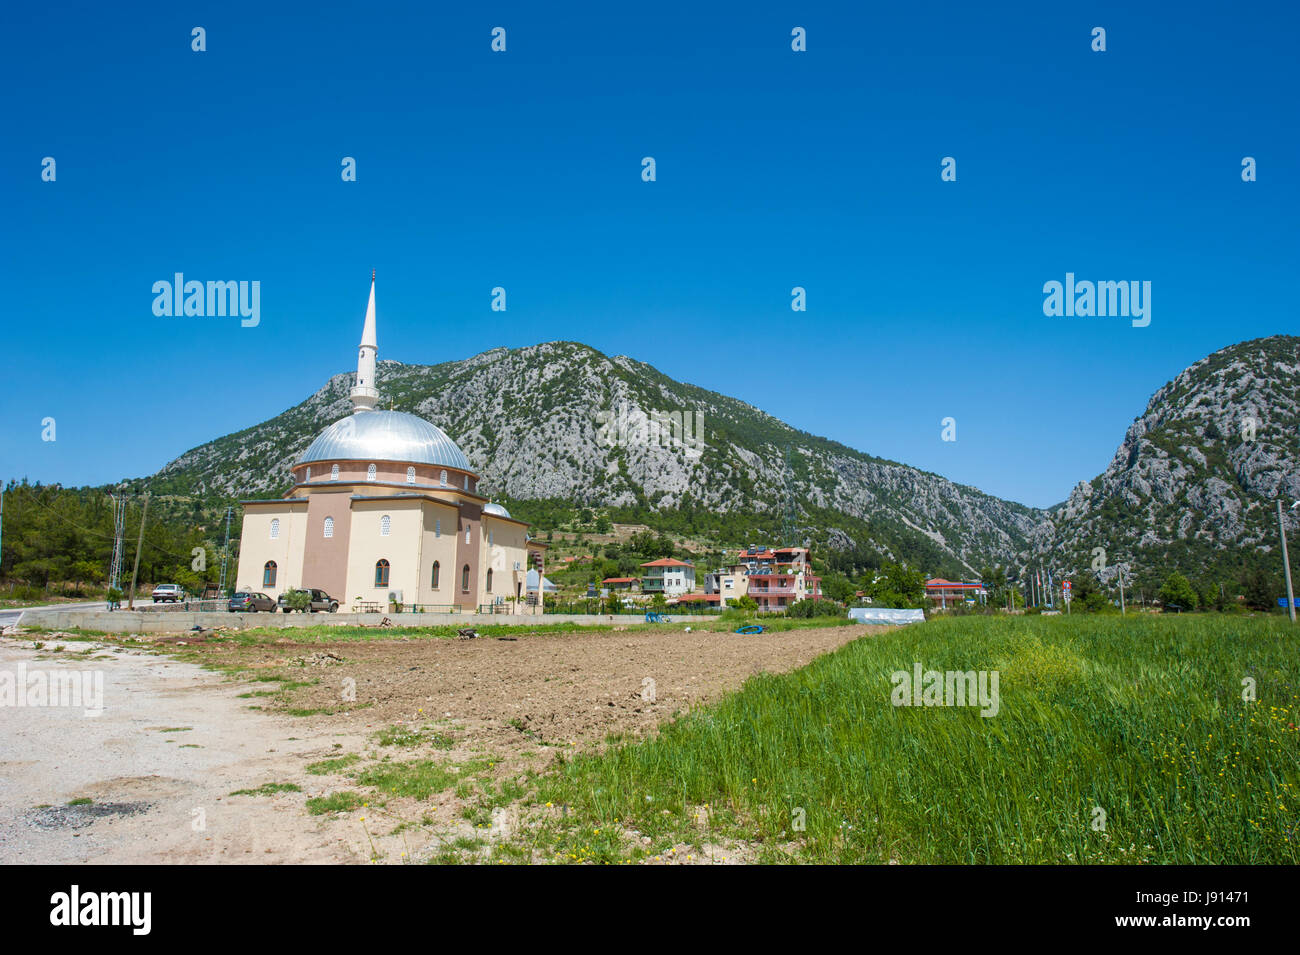 A newly built mosque in Antalya province of Turkey. Stock Photo